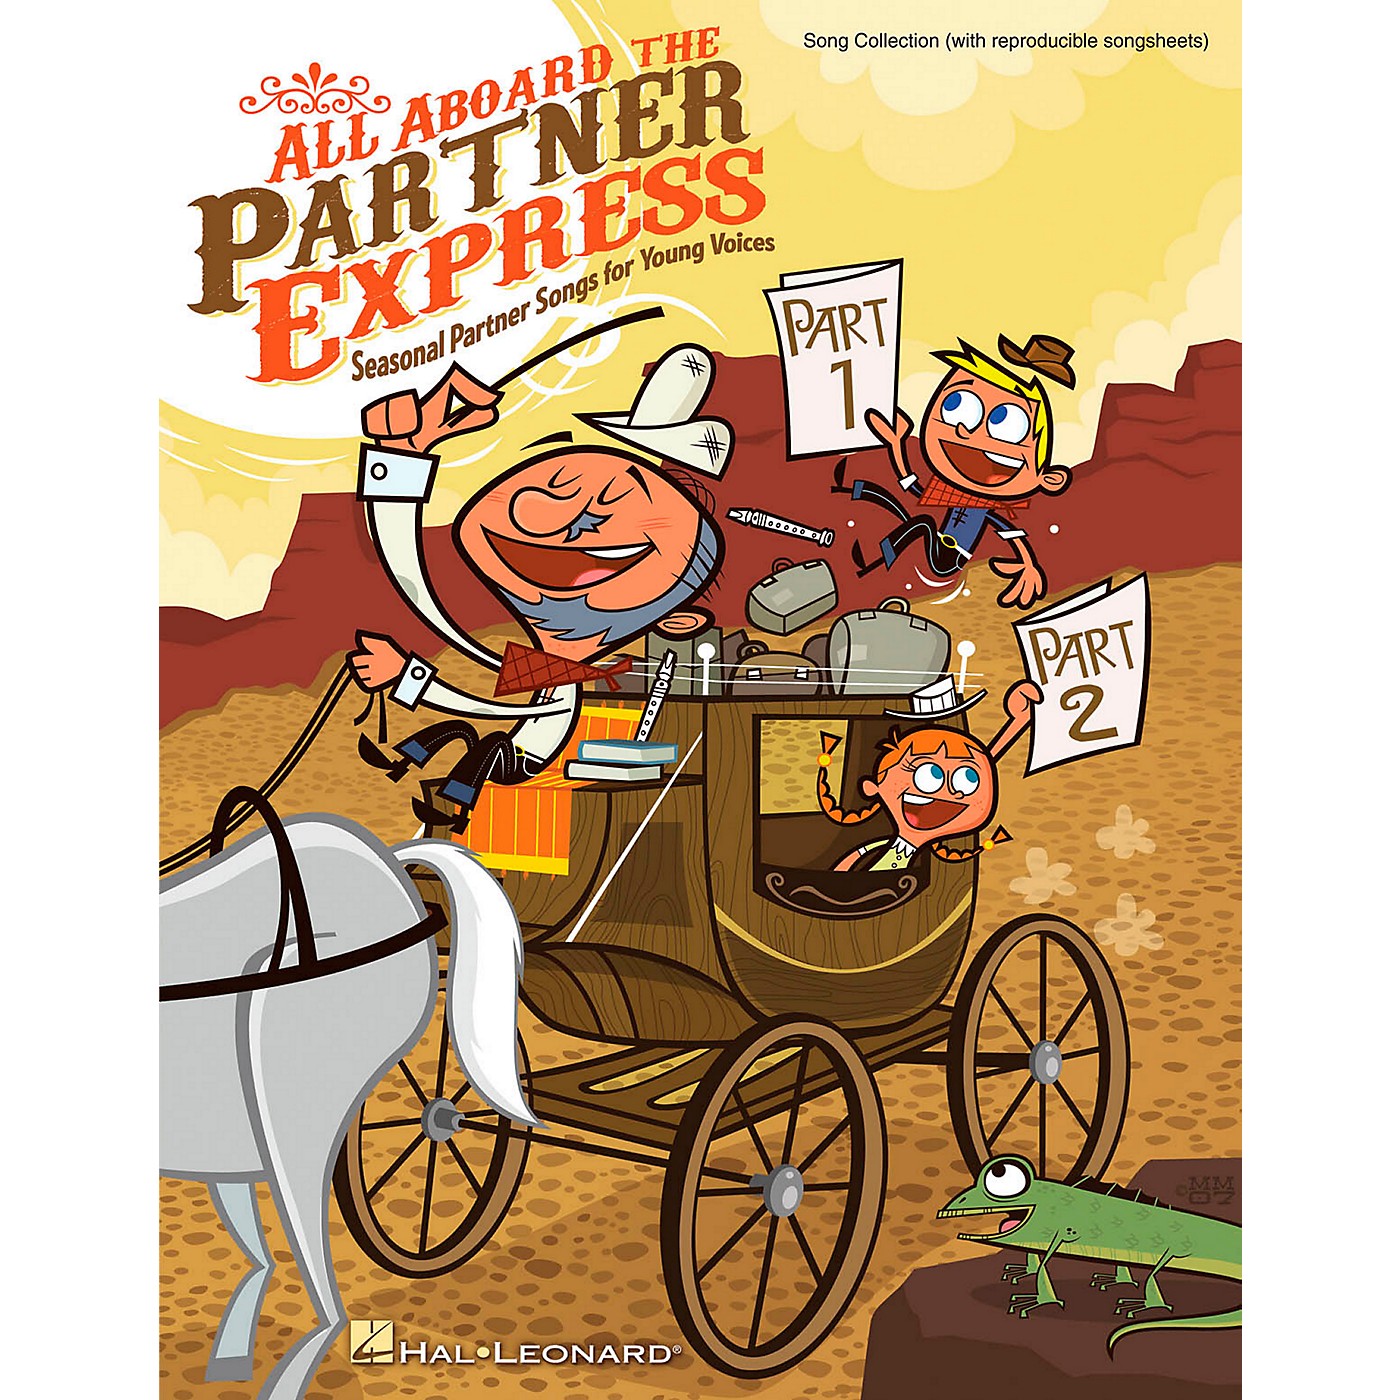 Hal Leonard All Aboard The Partner Express - Seasonal Partner Songs for Young Voices Songbook thumbnail